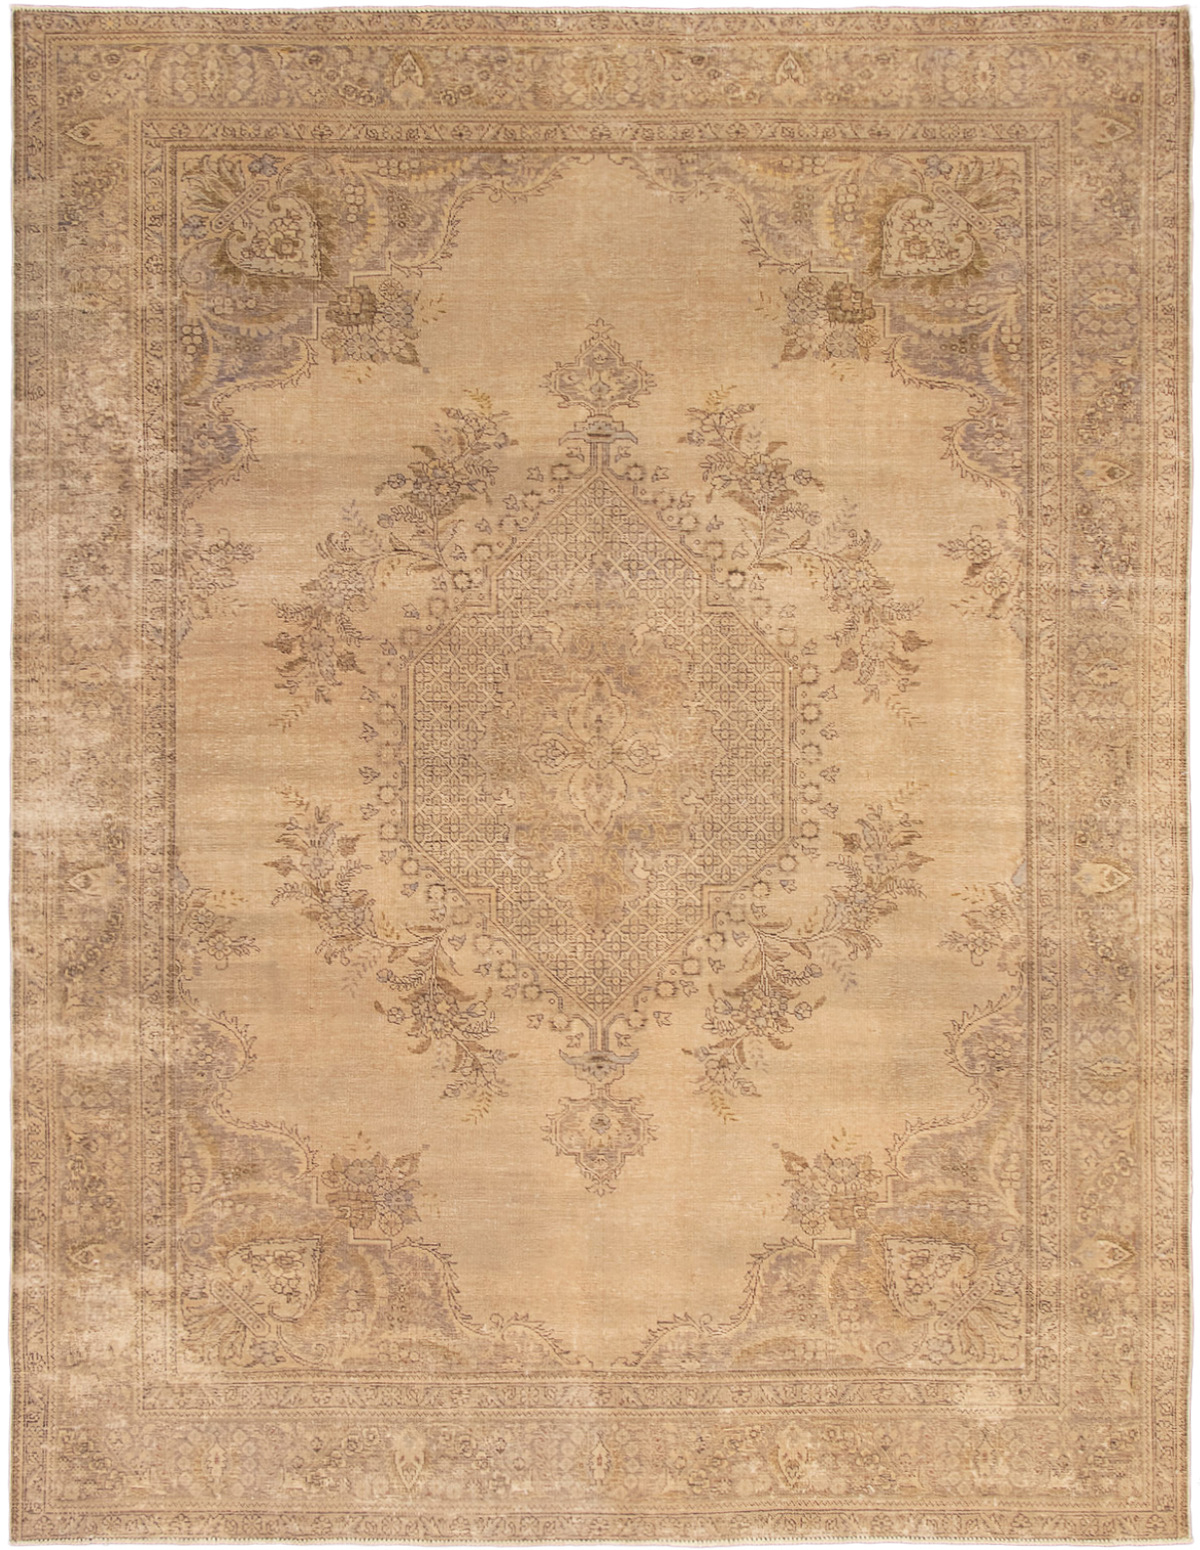 Hand-knotted Antalya Vintage Tan Wool Rug 9'6" x 12'3"  Size: 9'6" x 12'3"  